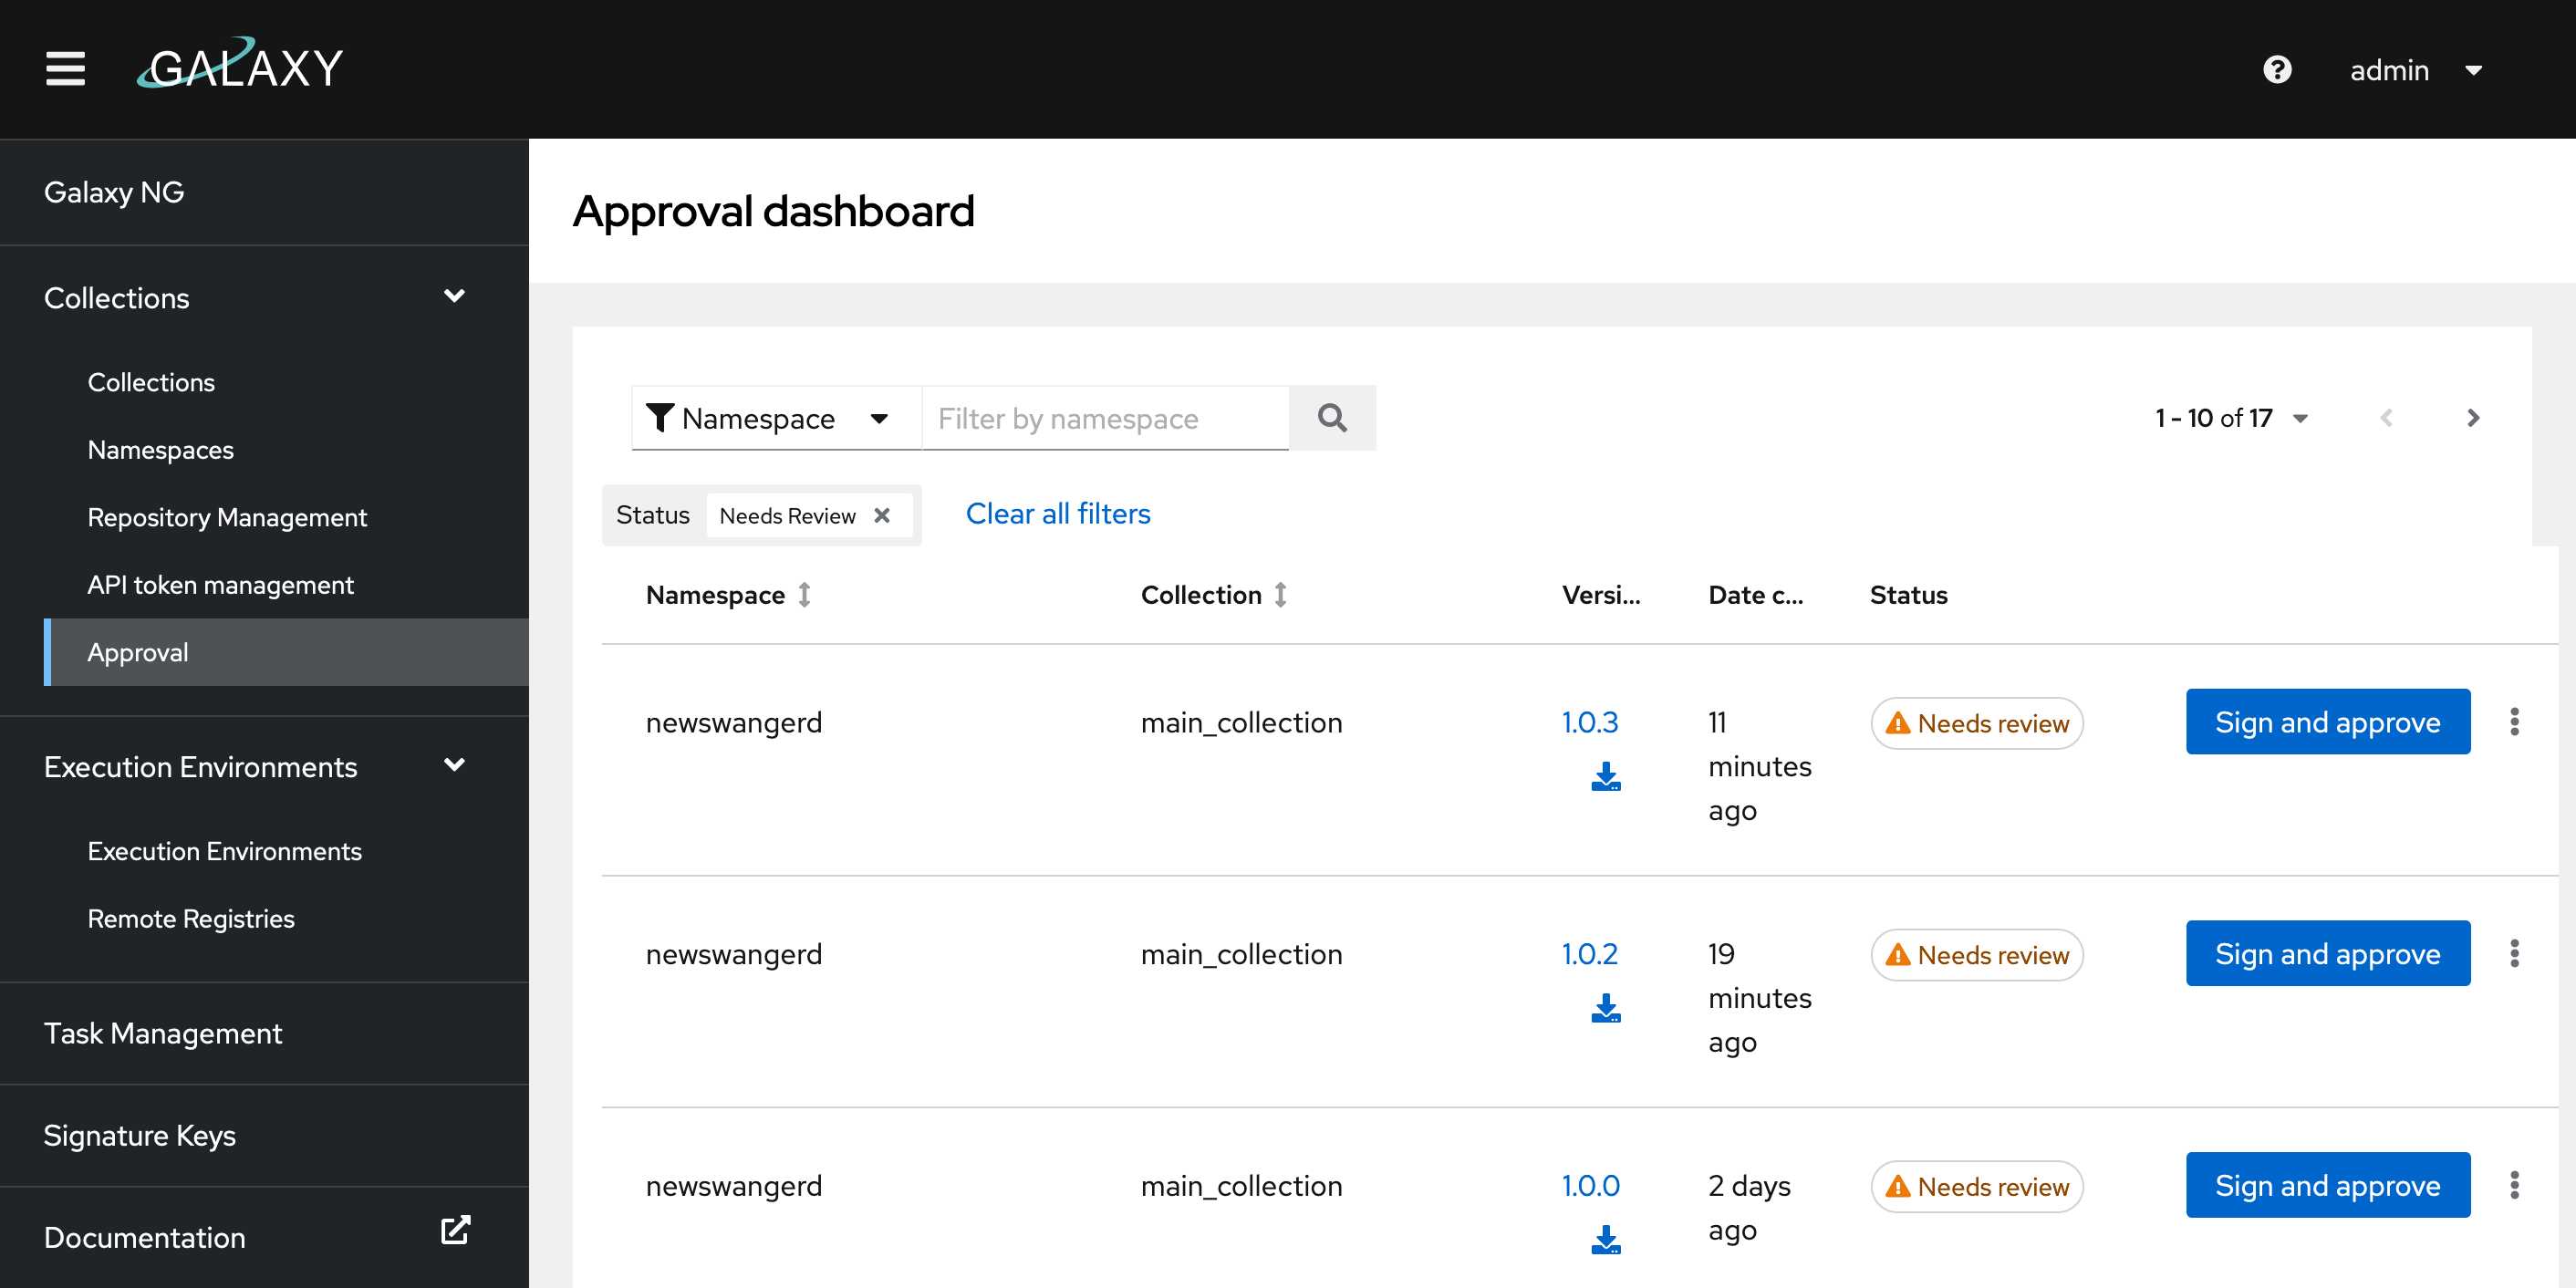 Approval dashboard